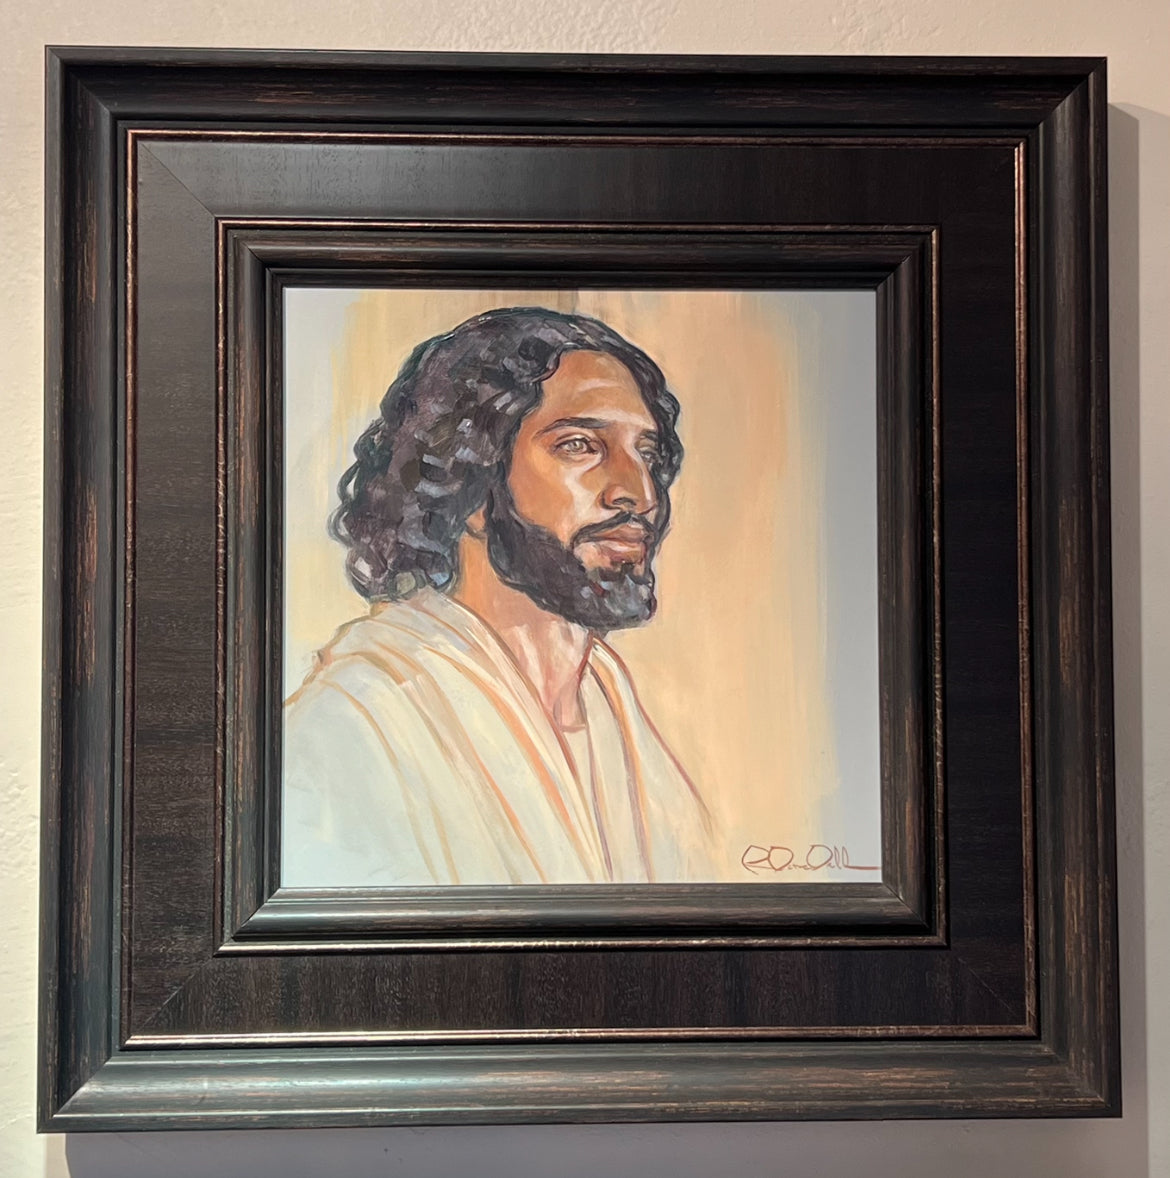 Oil Portrait of Christ I by Rose Datoc Dall.